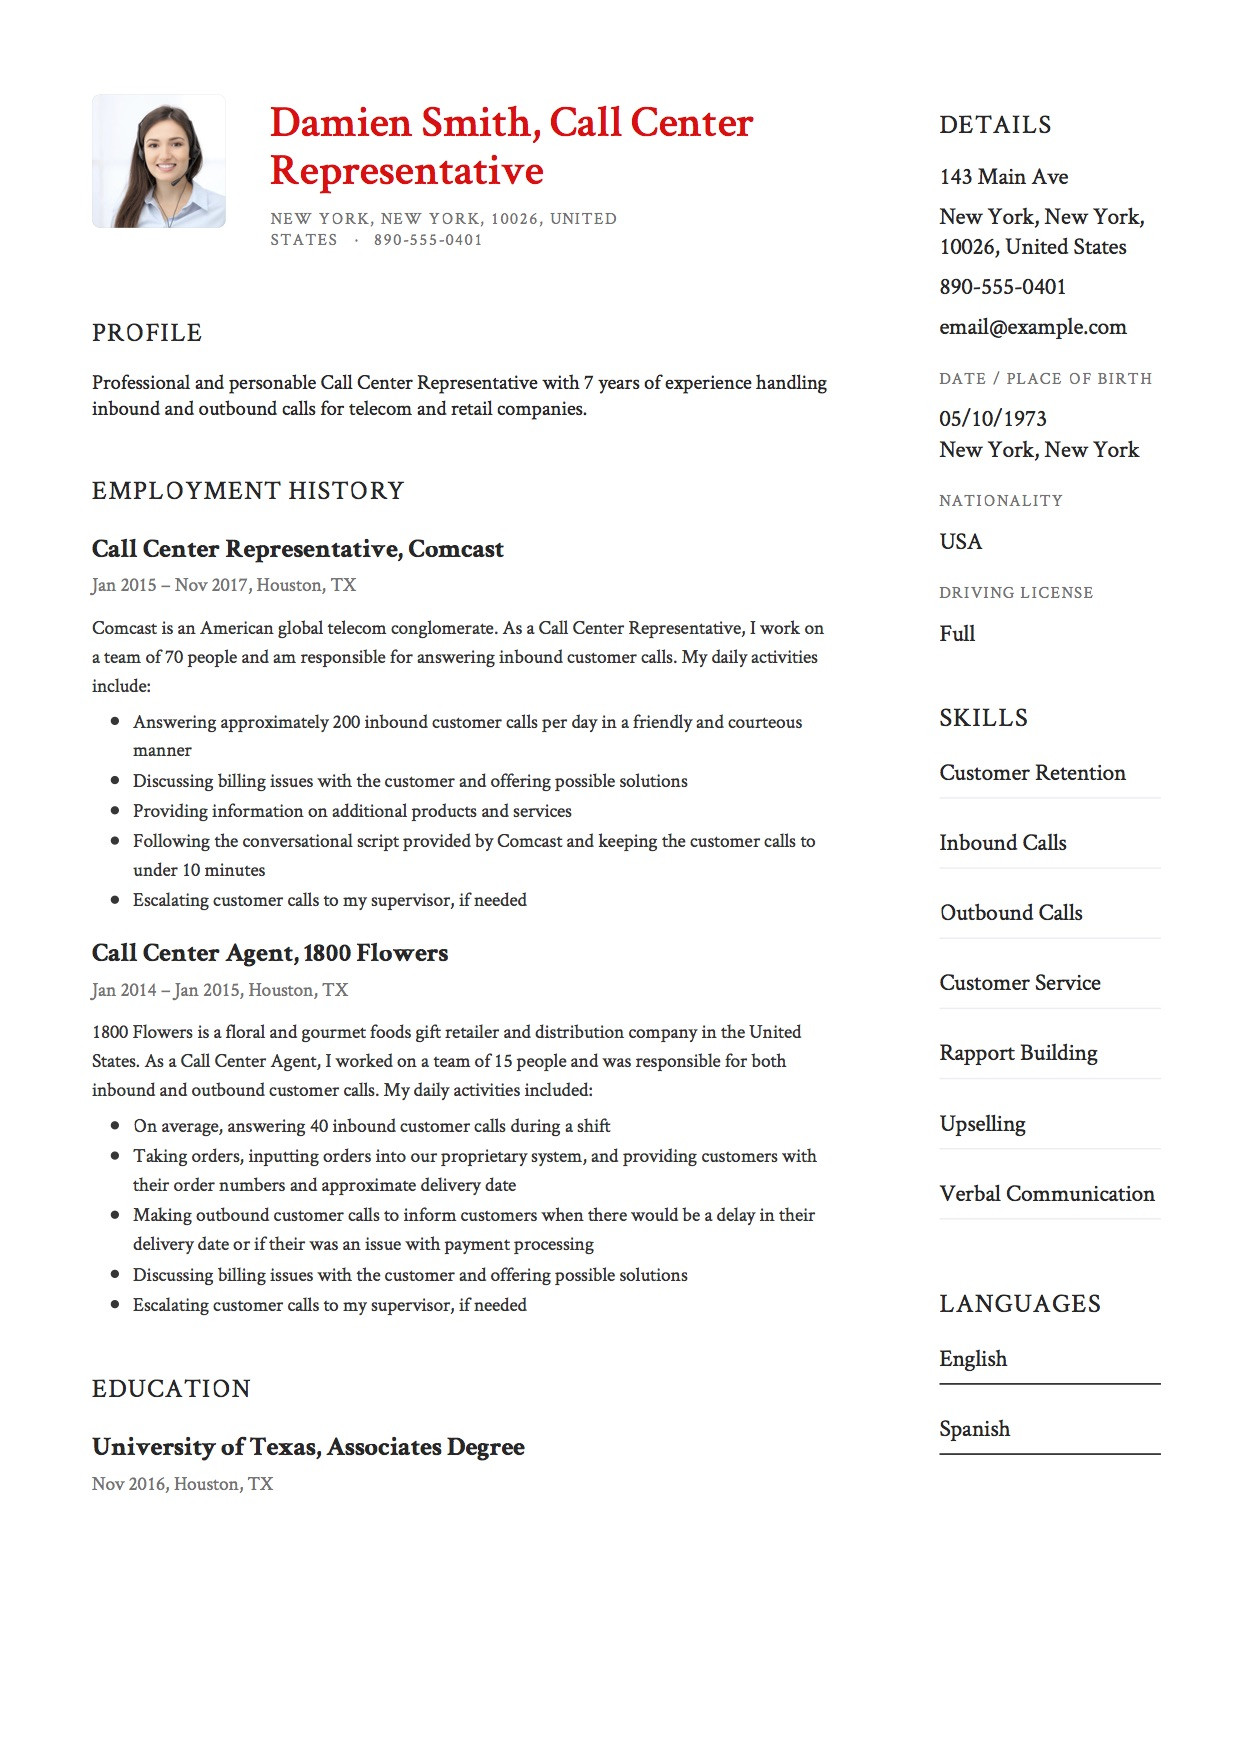 Sample Resume for Call Center Agent with Experience Resume Sample for Call Center Agent Philippines